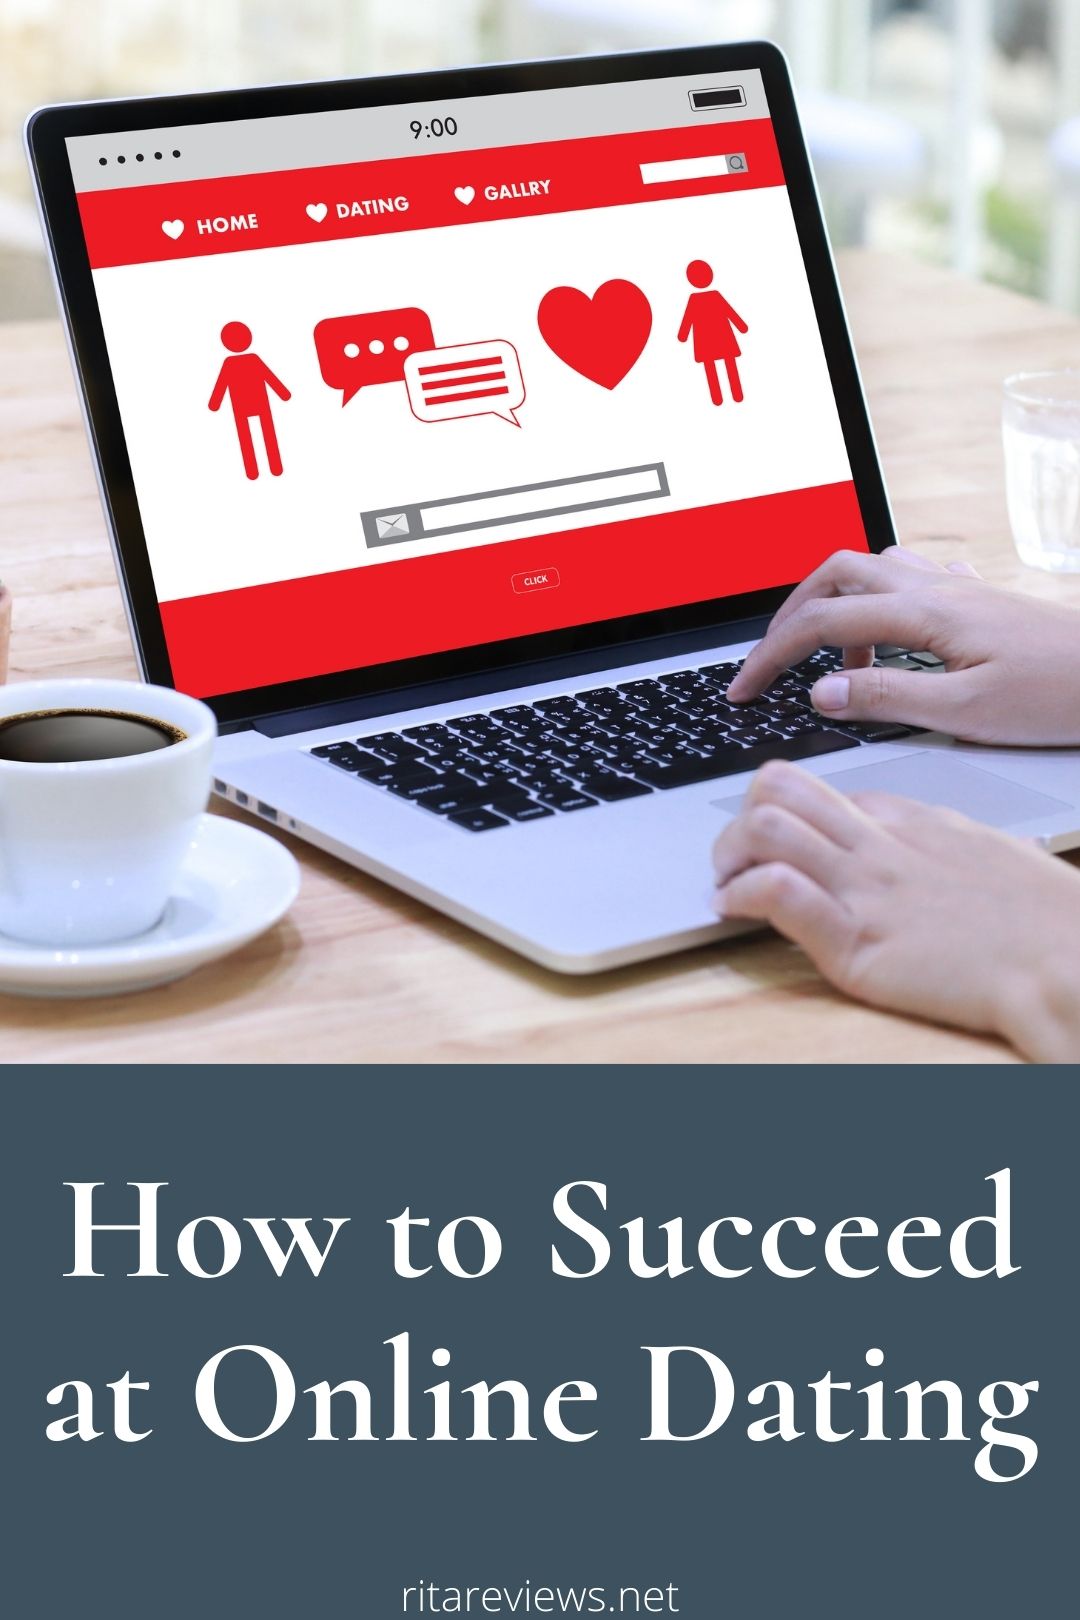 How to Succeed at Online Dating